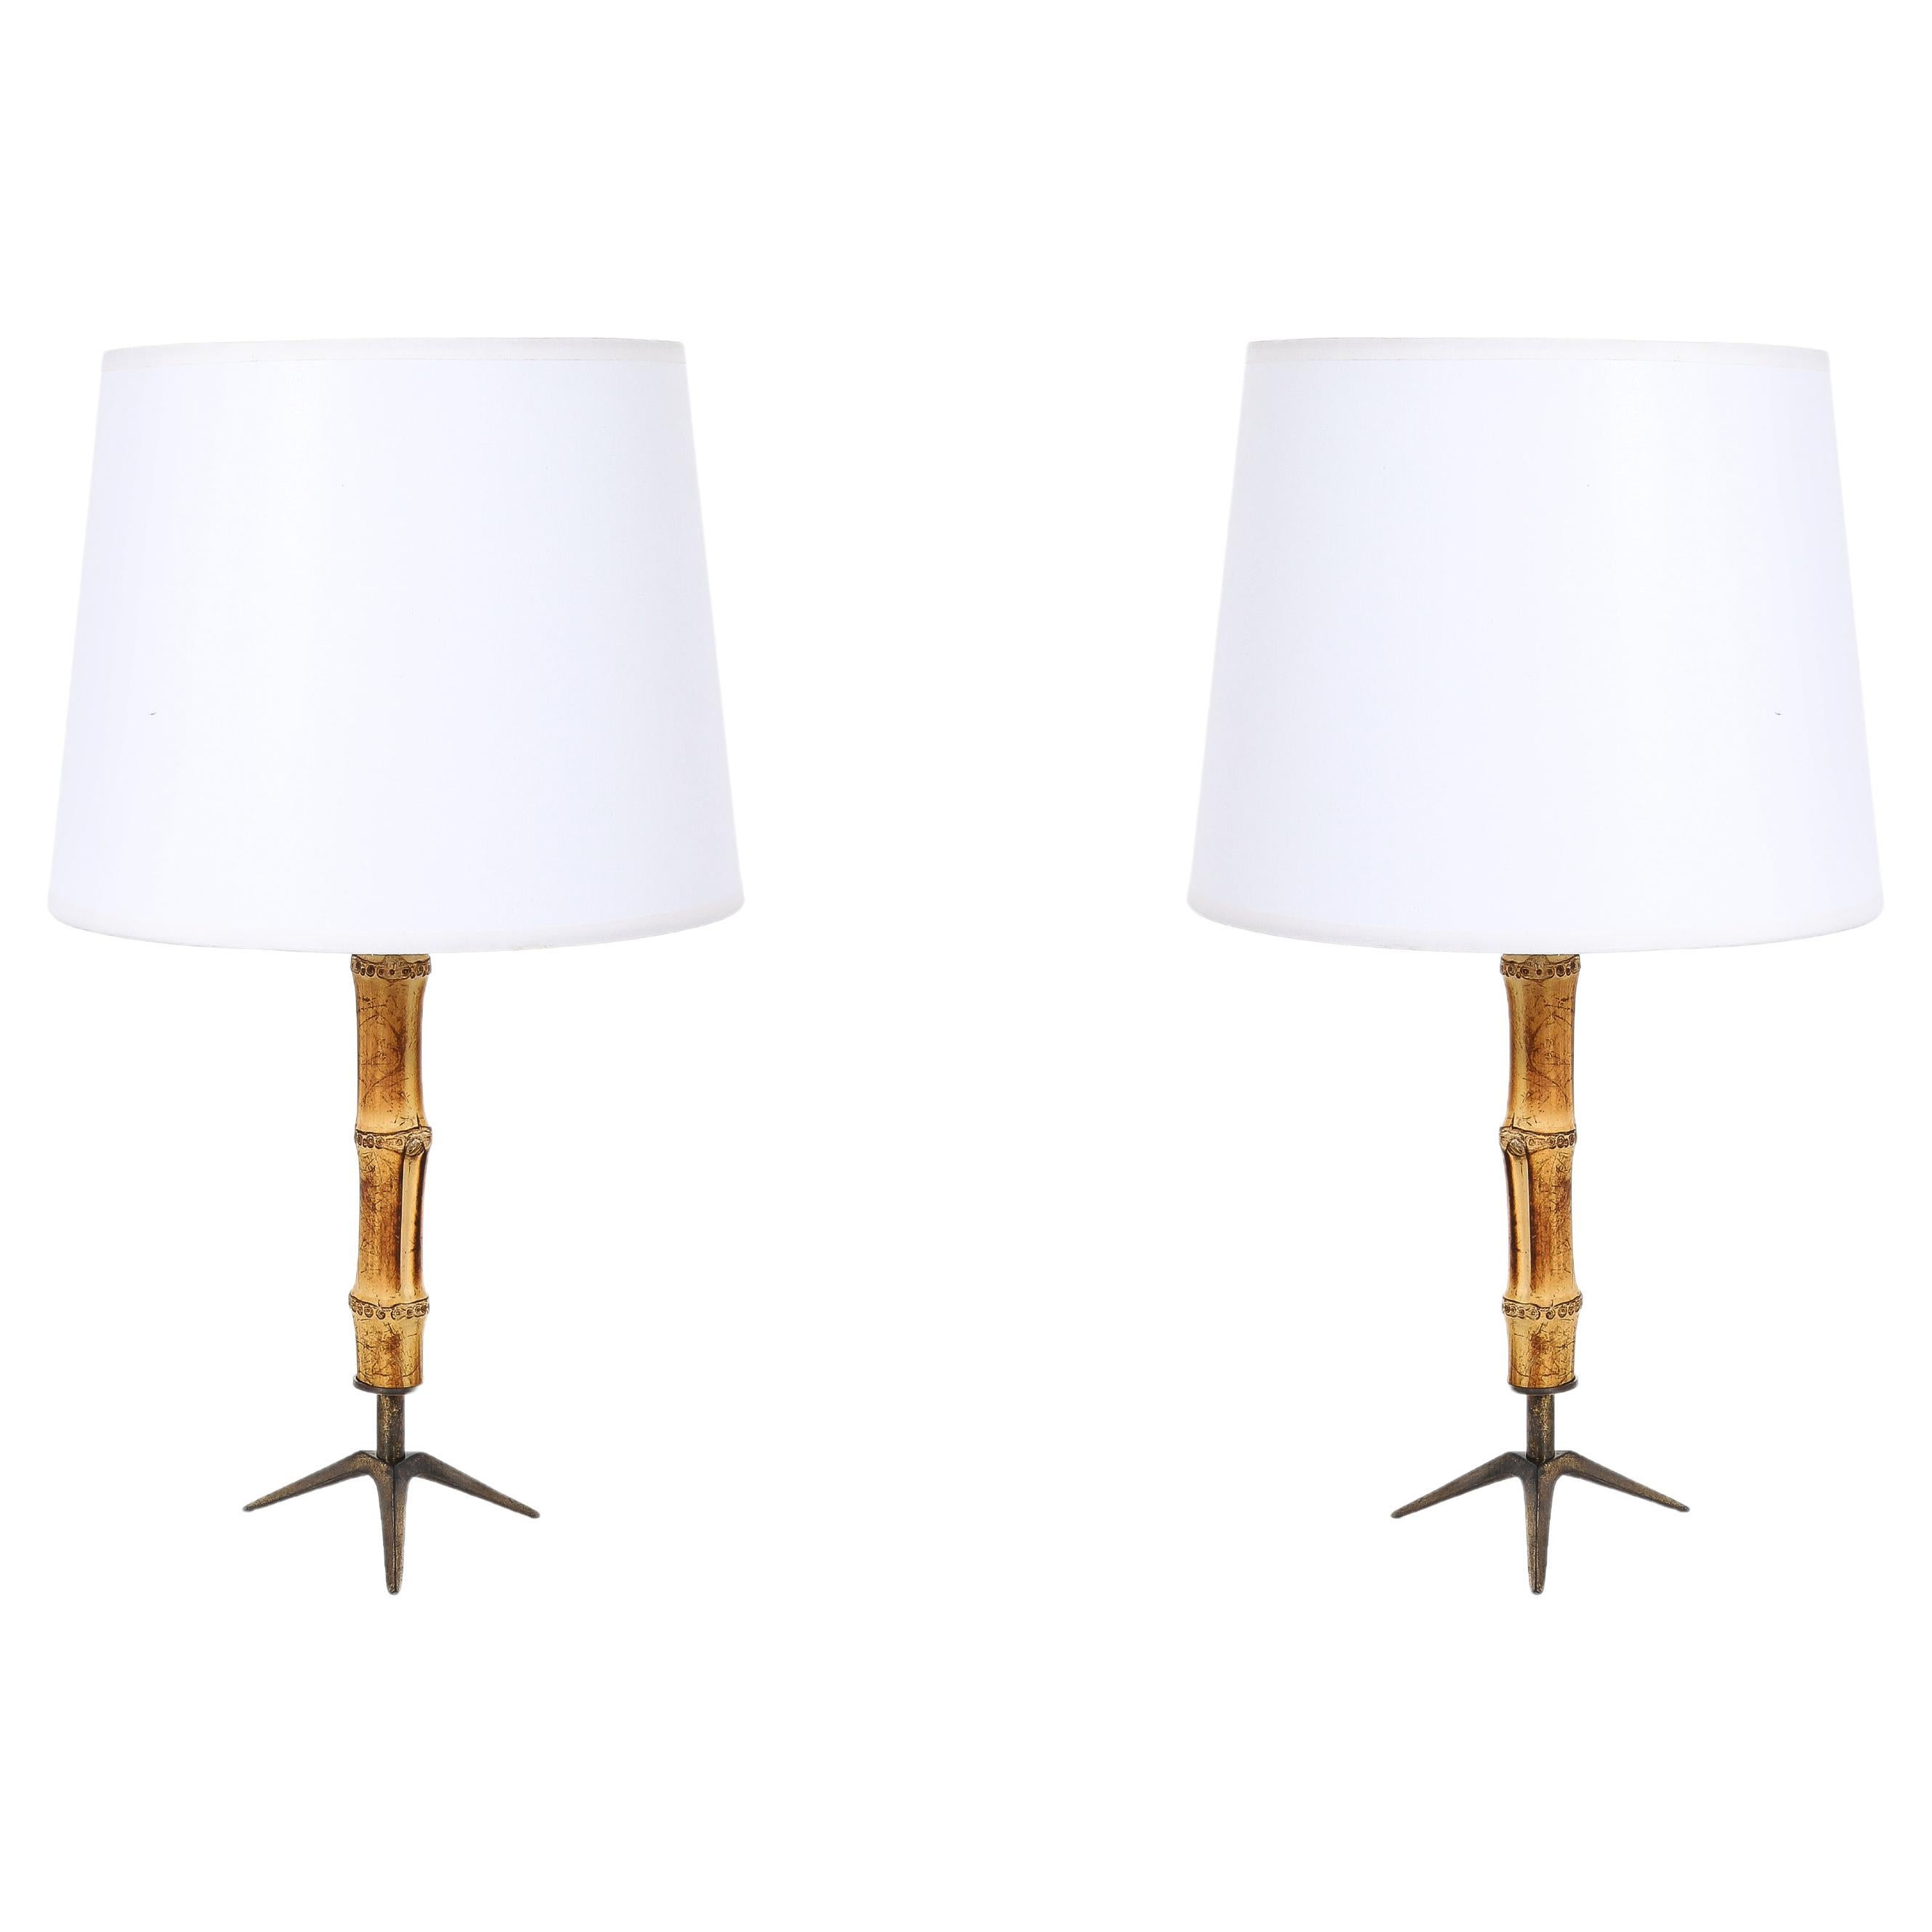 Petite Bamboo Table Lamps, France 1950's For Sale